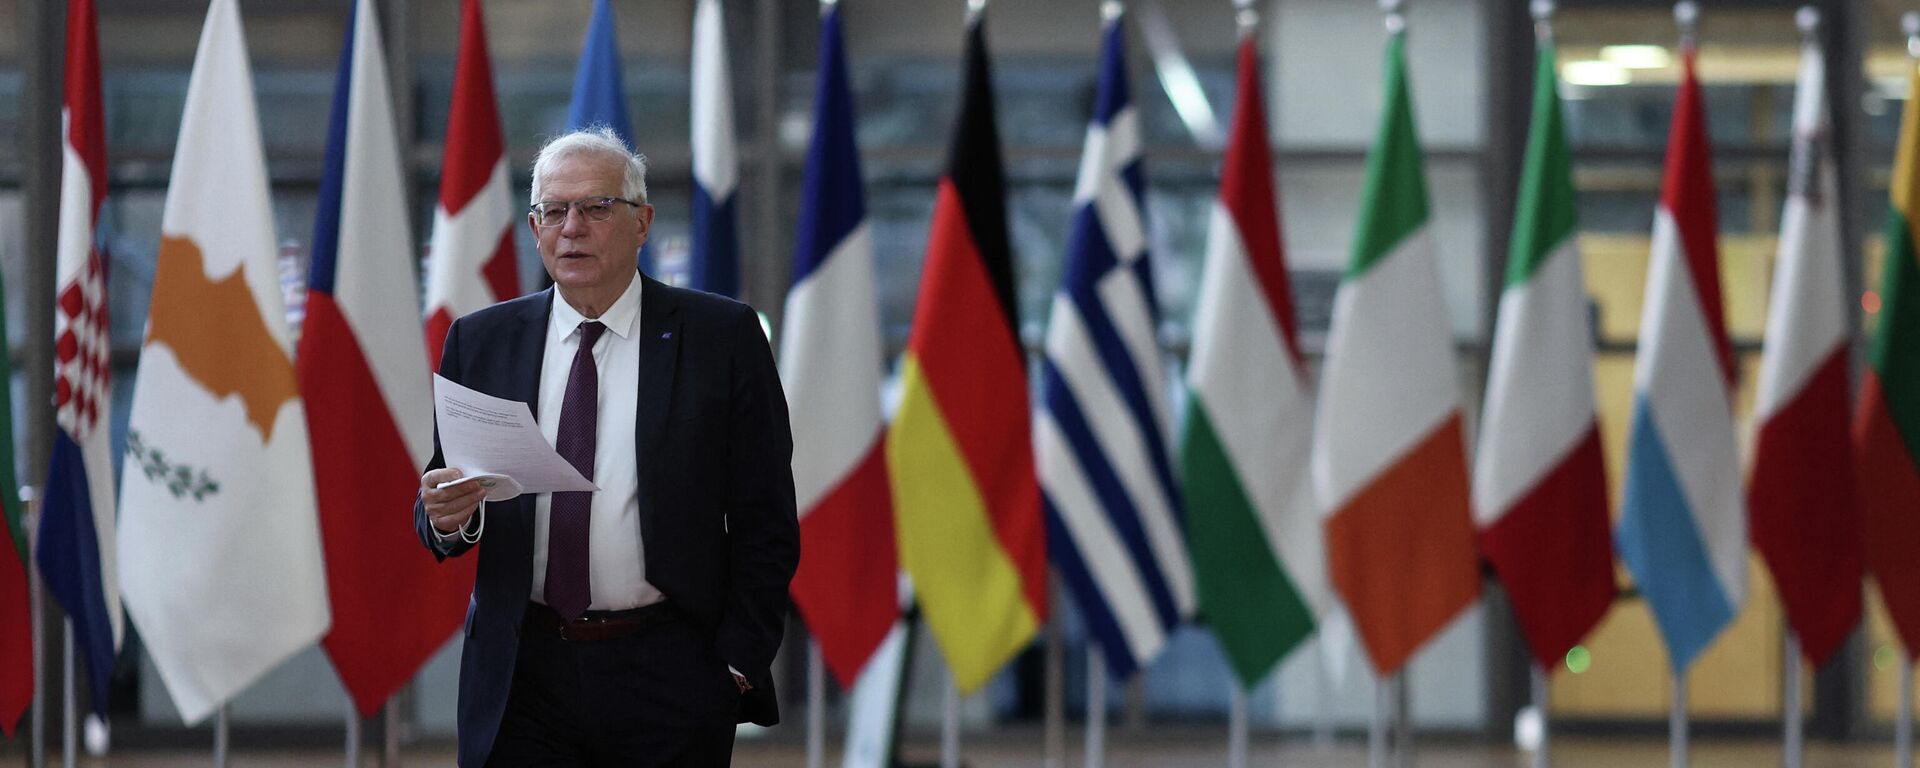 European Union High Representative for Foreign Affairs and Security Policy Josep Borrell arrives for a Foreign Affairs Council meeting at the EU headquarters in Brussels on February 21, 2022.  - Sputnik International, 1920, 04.07.2022